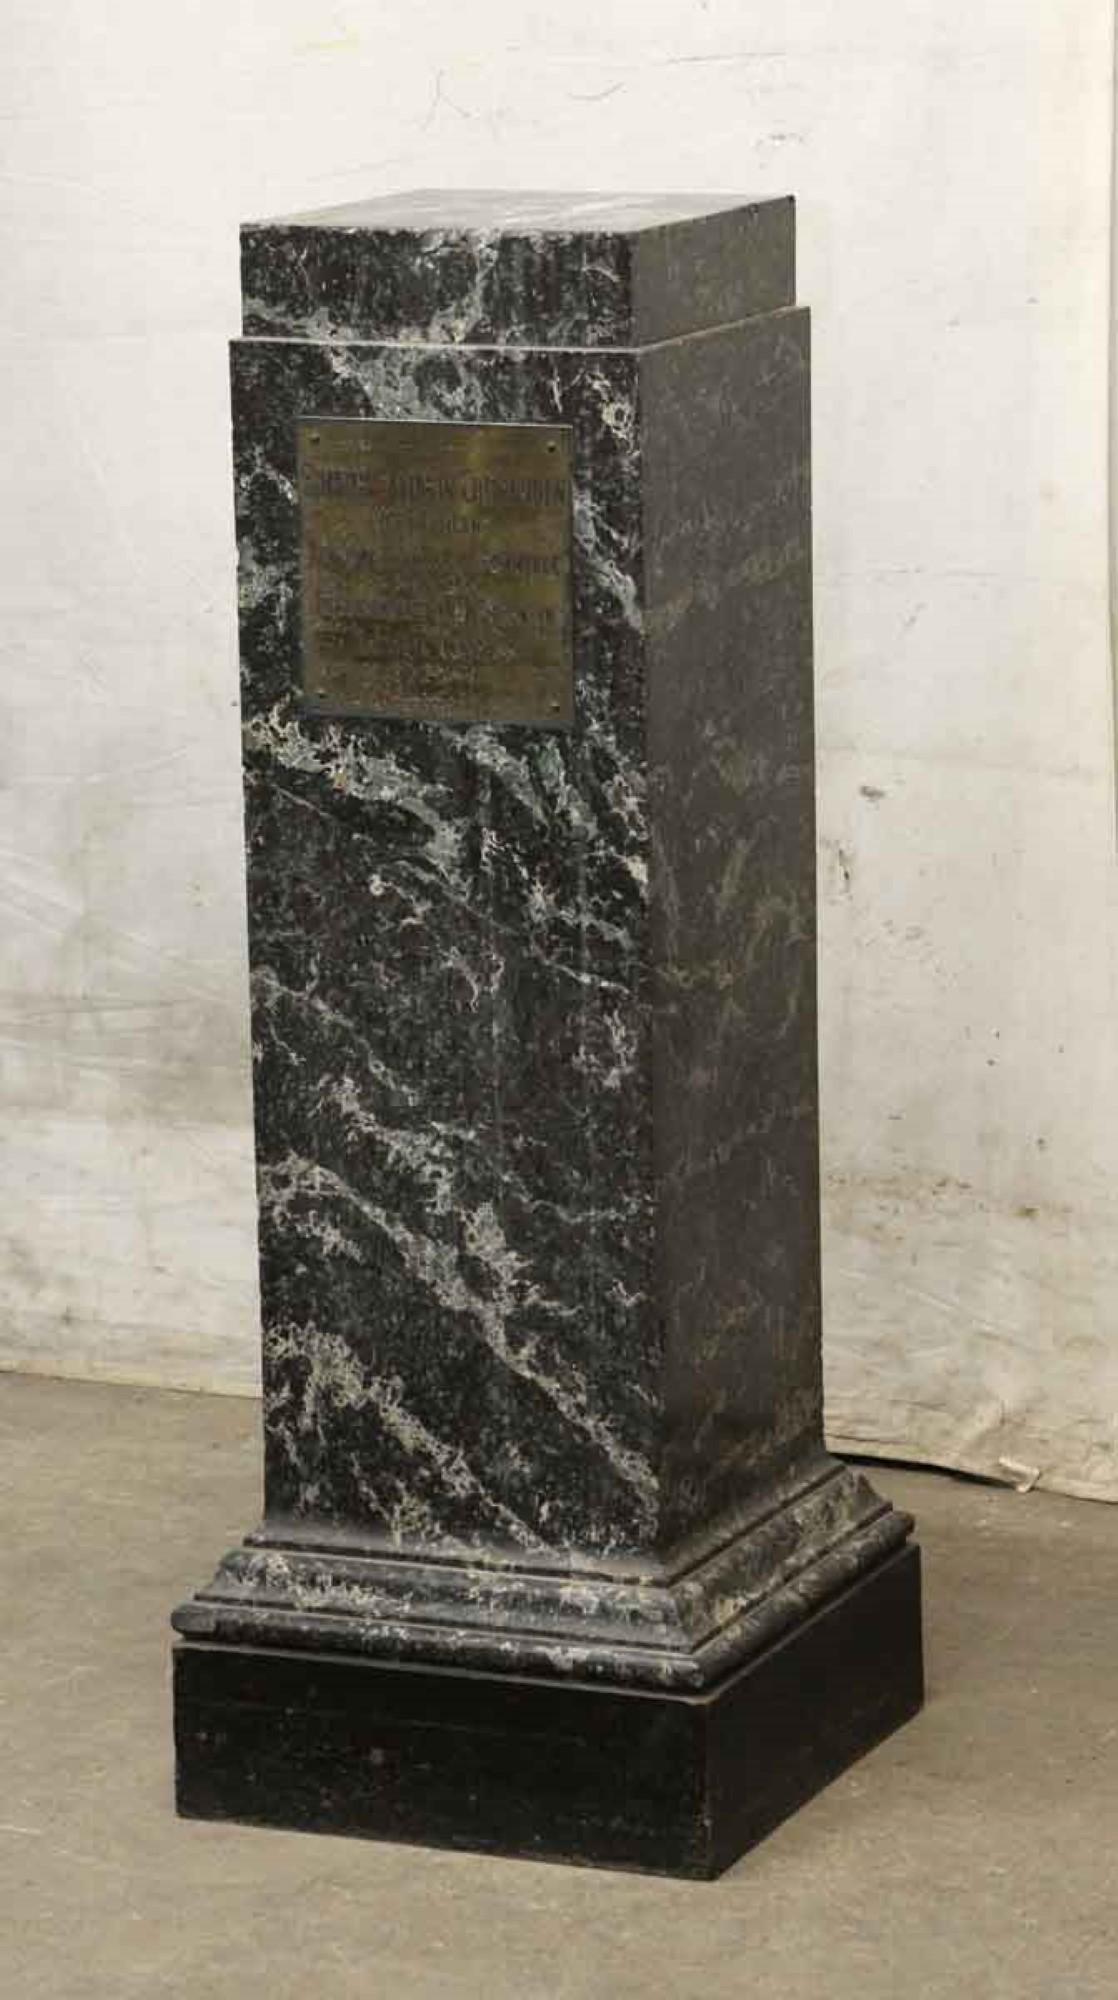 Dark green solid marble pedestal with splashes of light green, gray and brown from the 1890s. The plaque is inscribed for Simeon Balwdin Chittenden. This can be viewed at one of our New York City locations. Please inquire for the exact address.